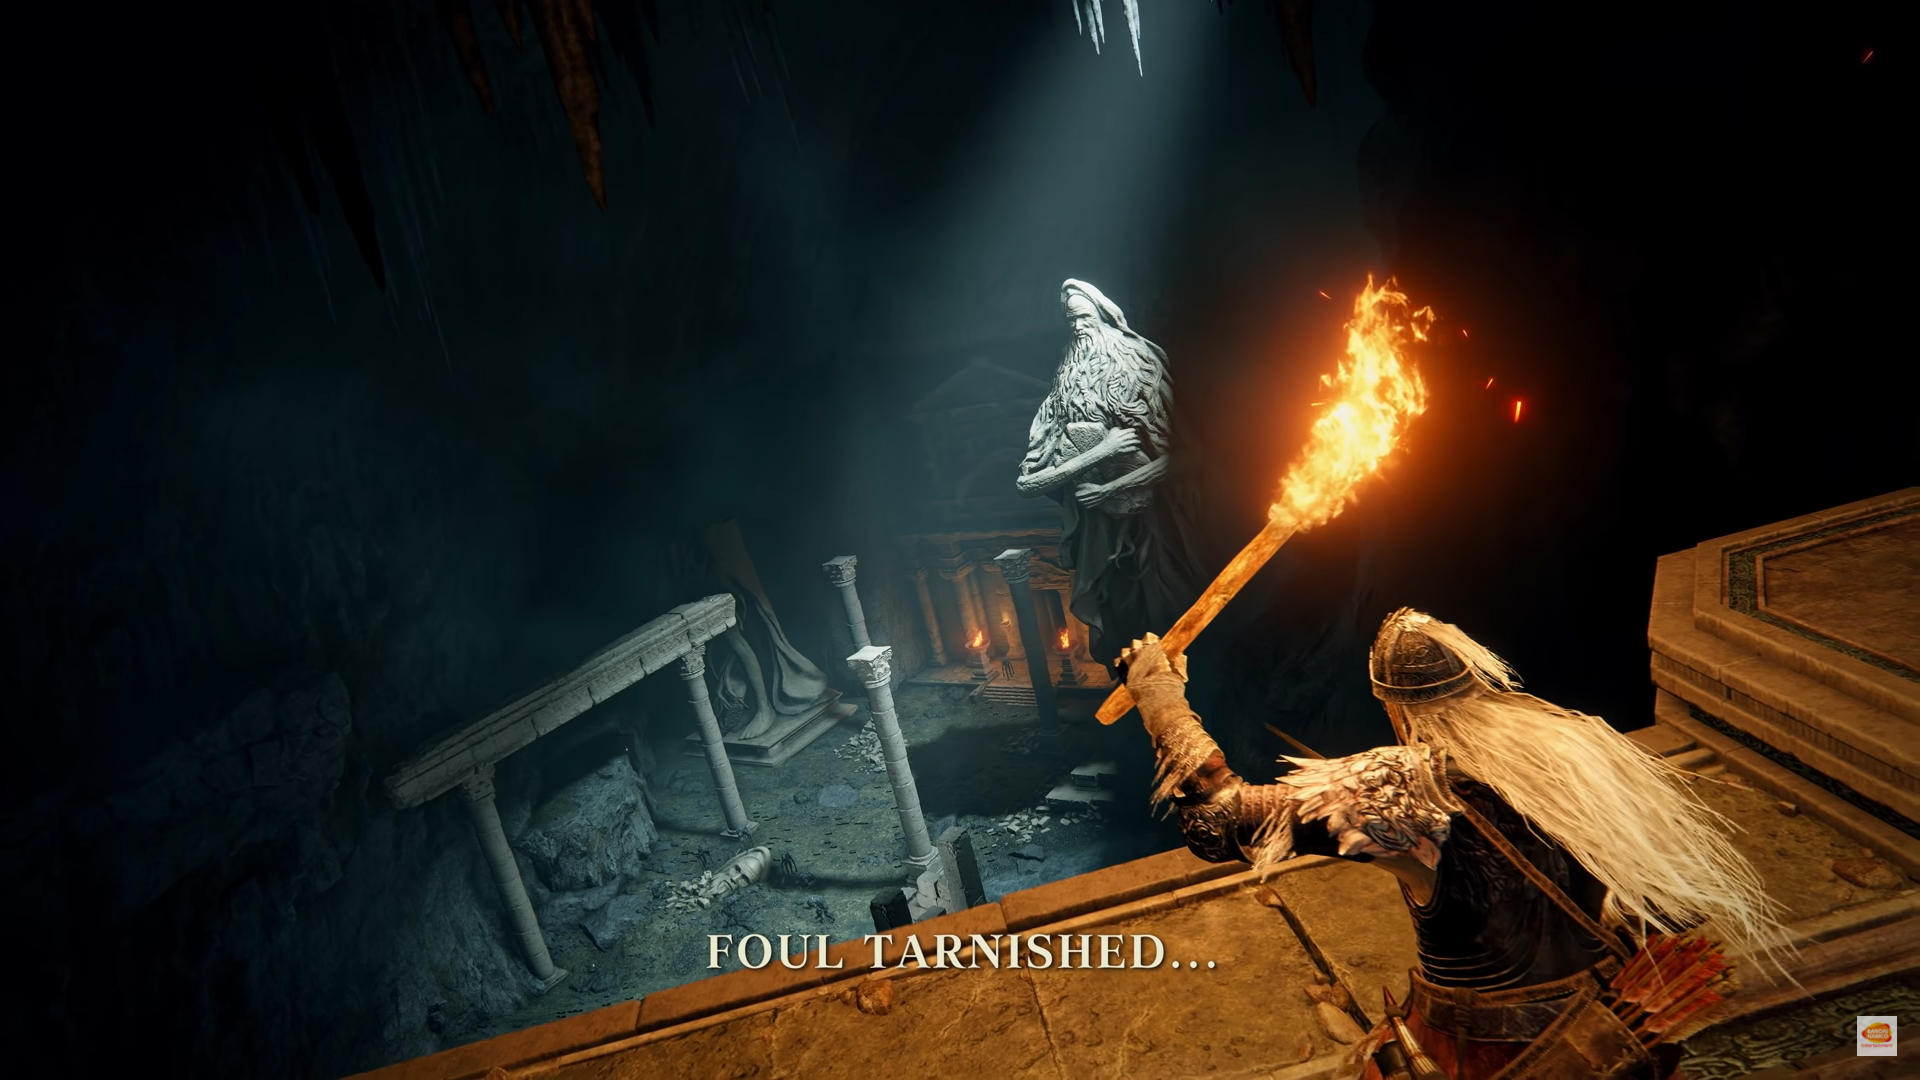 Discussing the Elden Ring gameplay reveal Weapons and Armour The